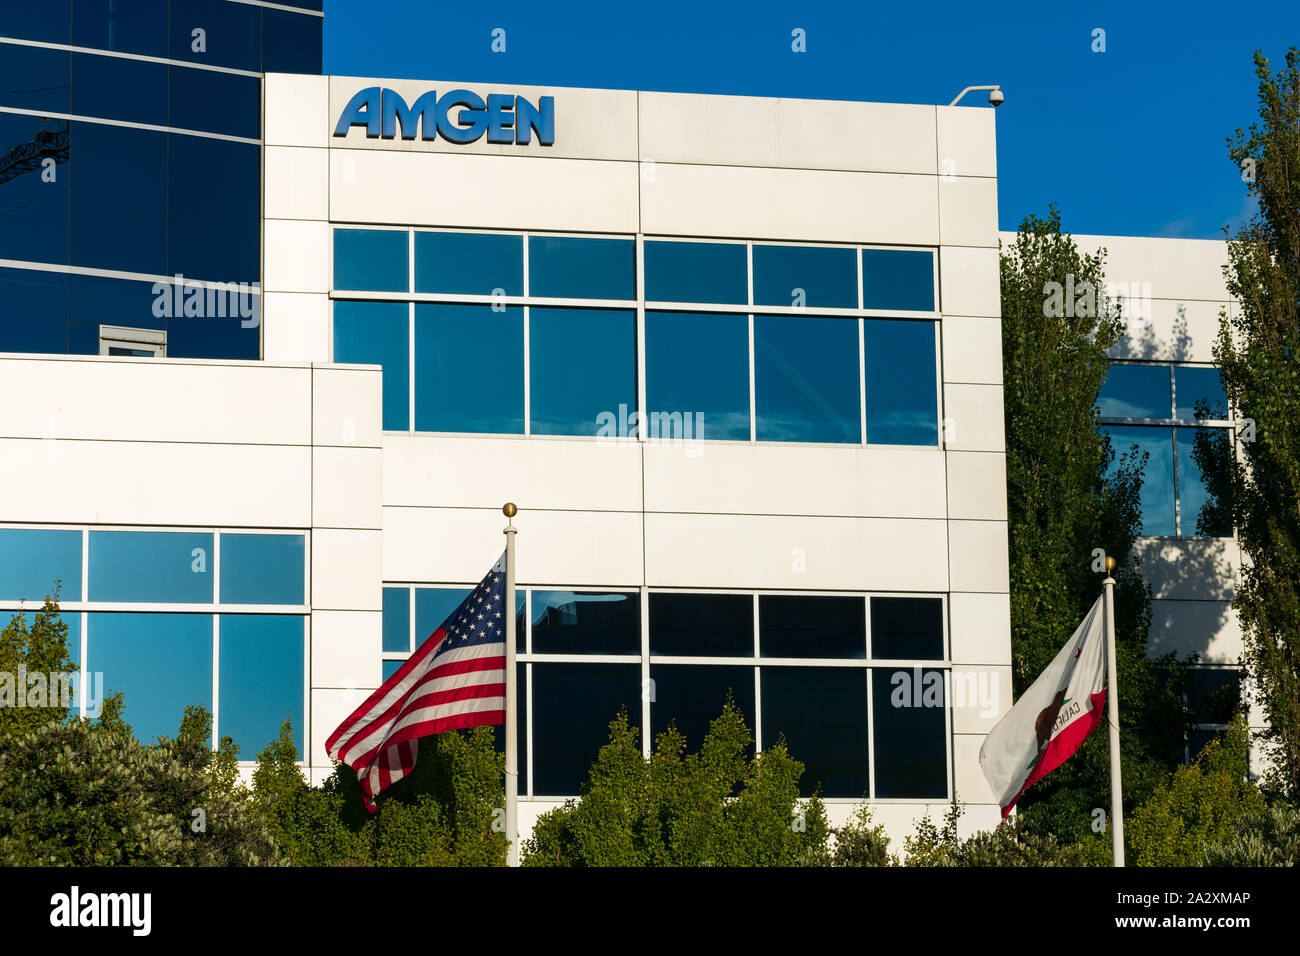 Amgen sign at biopharmaceutical company office in Silicon Valley, biotech company headquartered in Thousand Oaks Stock Photo